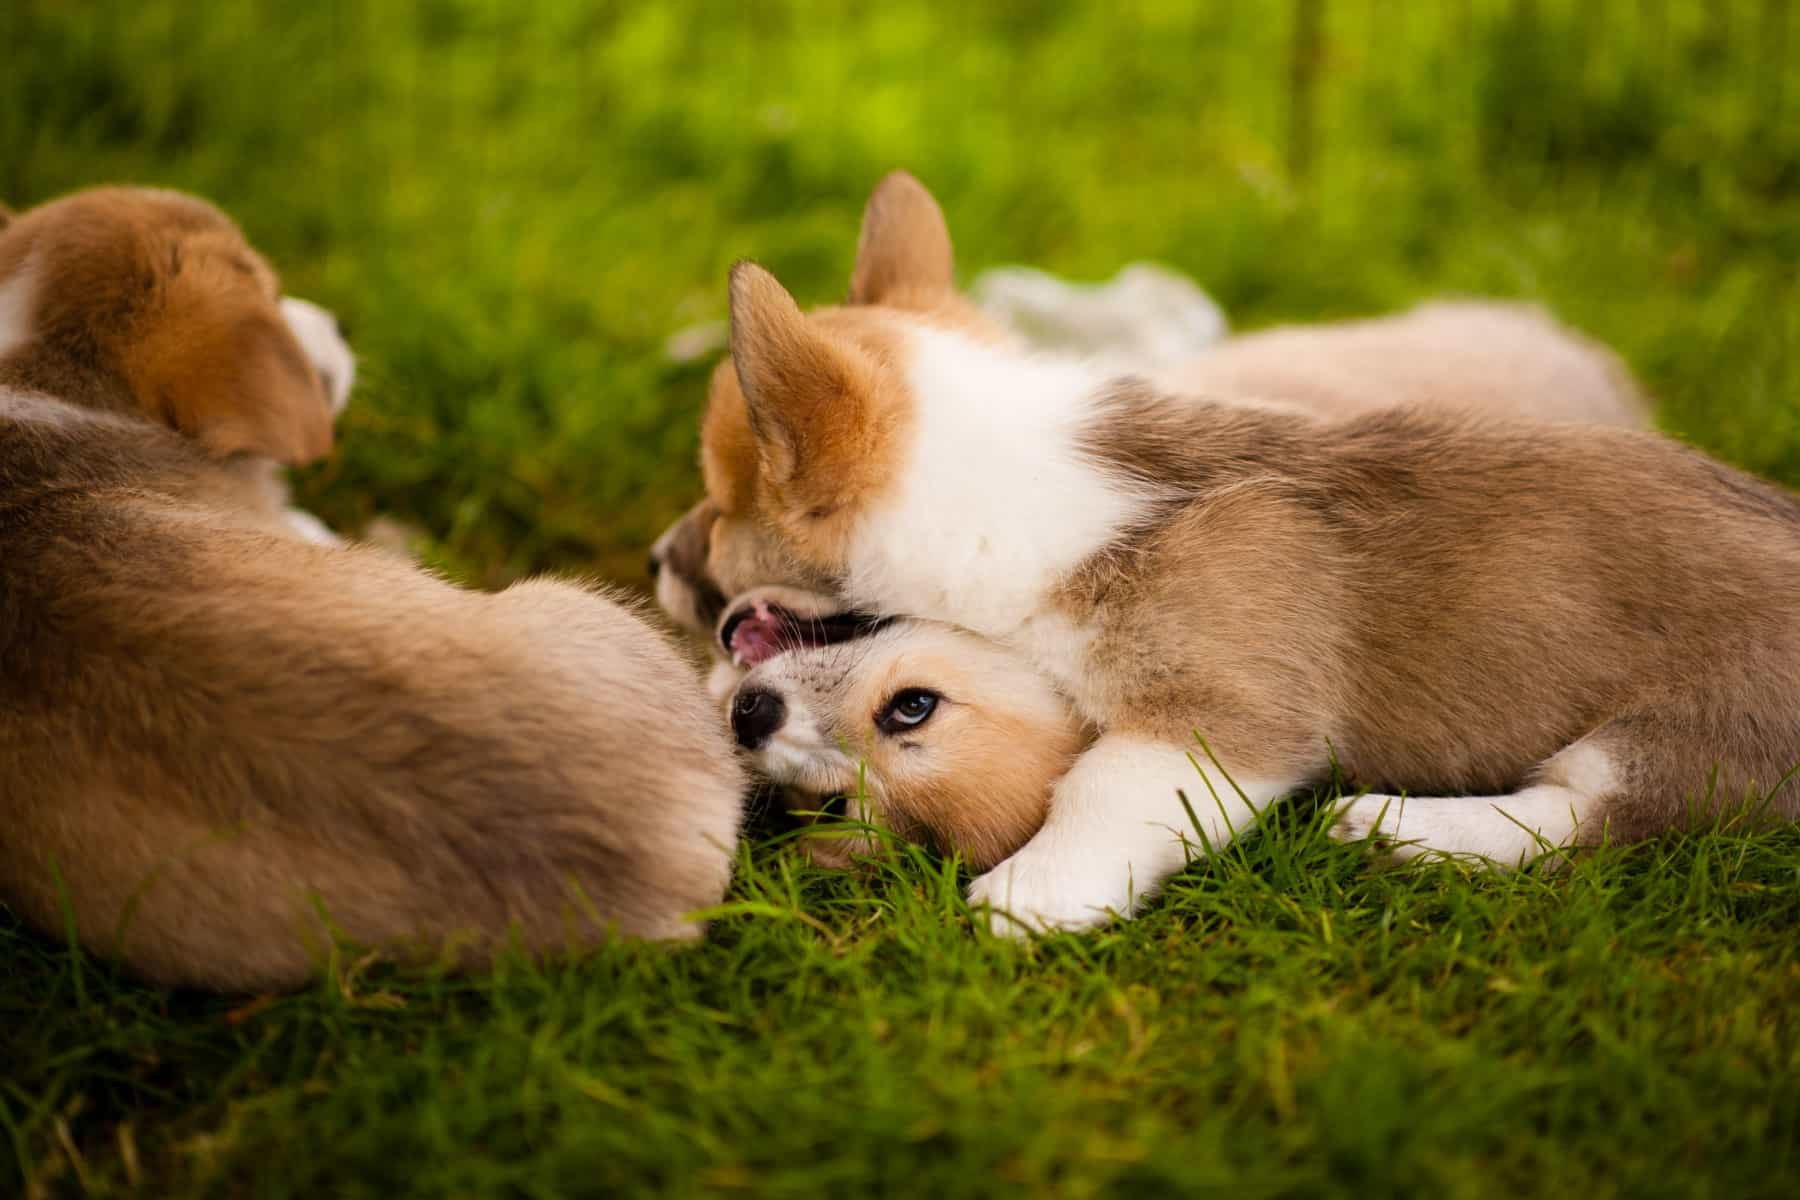 Why corgis fight? Here are three corgi puppies rough-housing in the green grass.